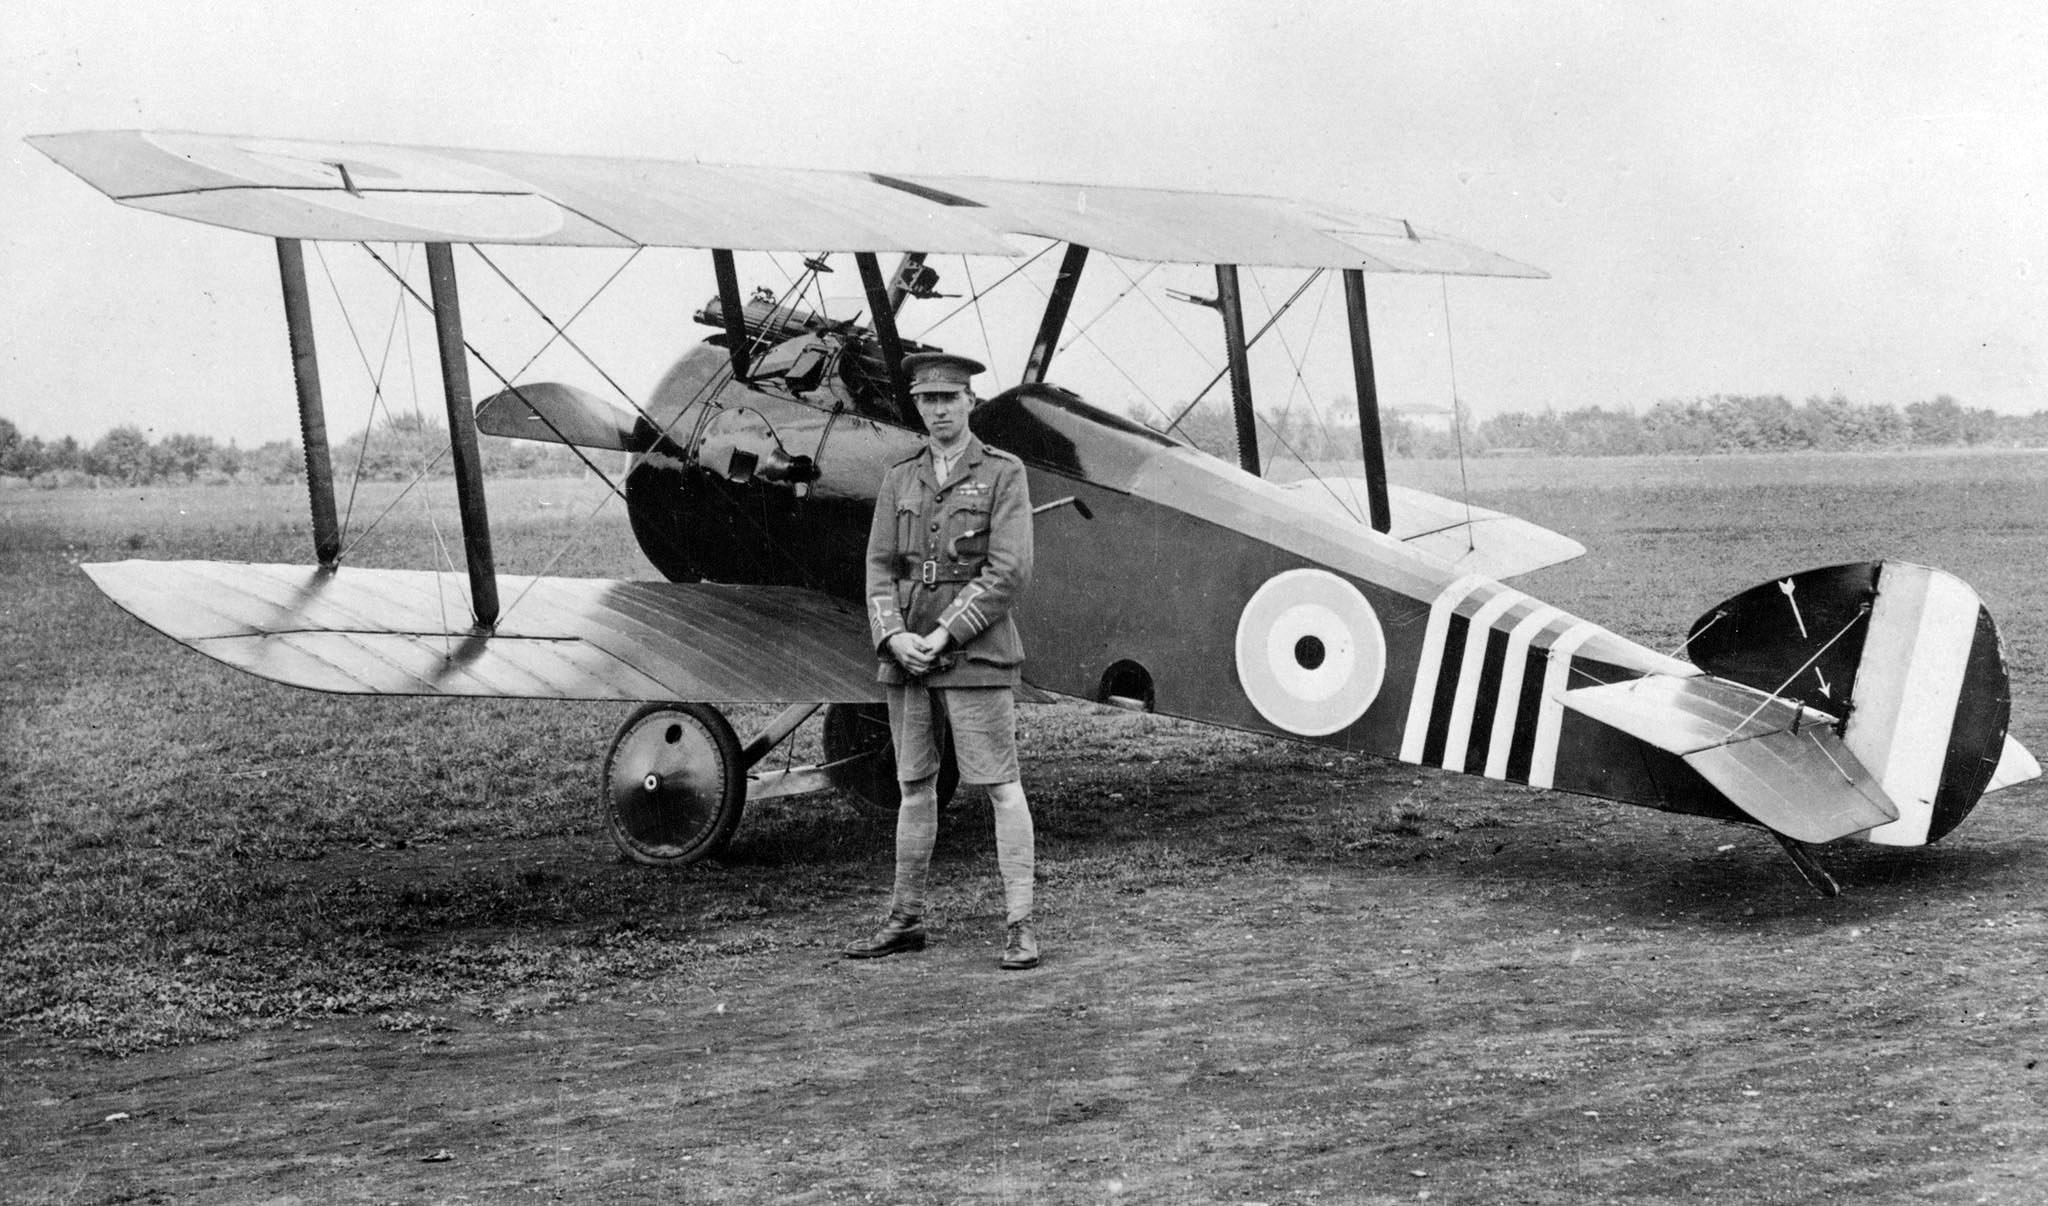 Black and white photo of William and his aircraft.